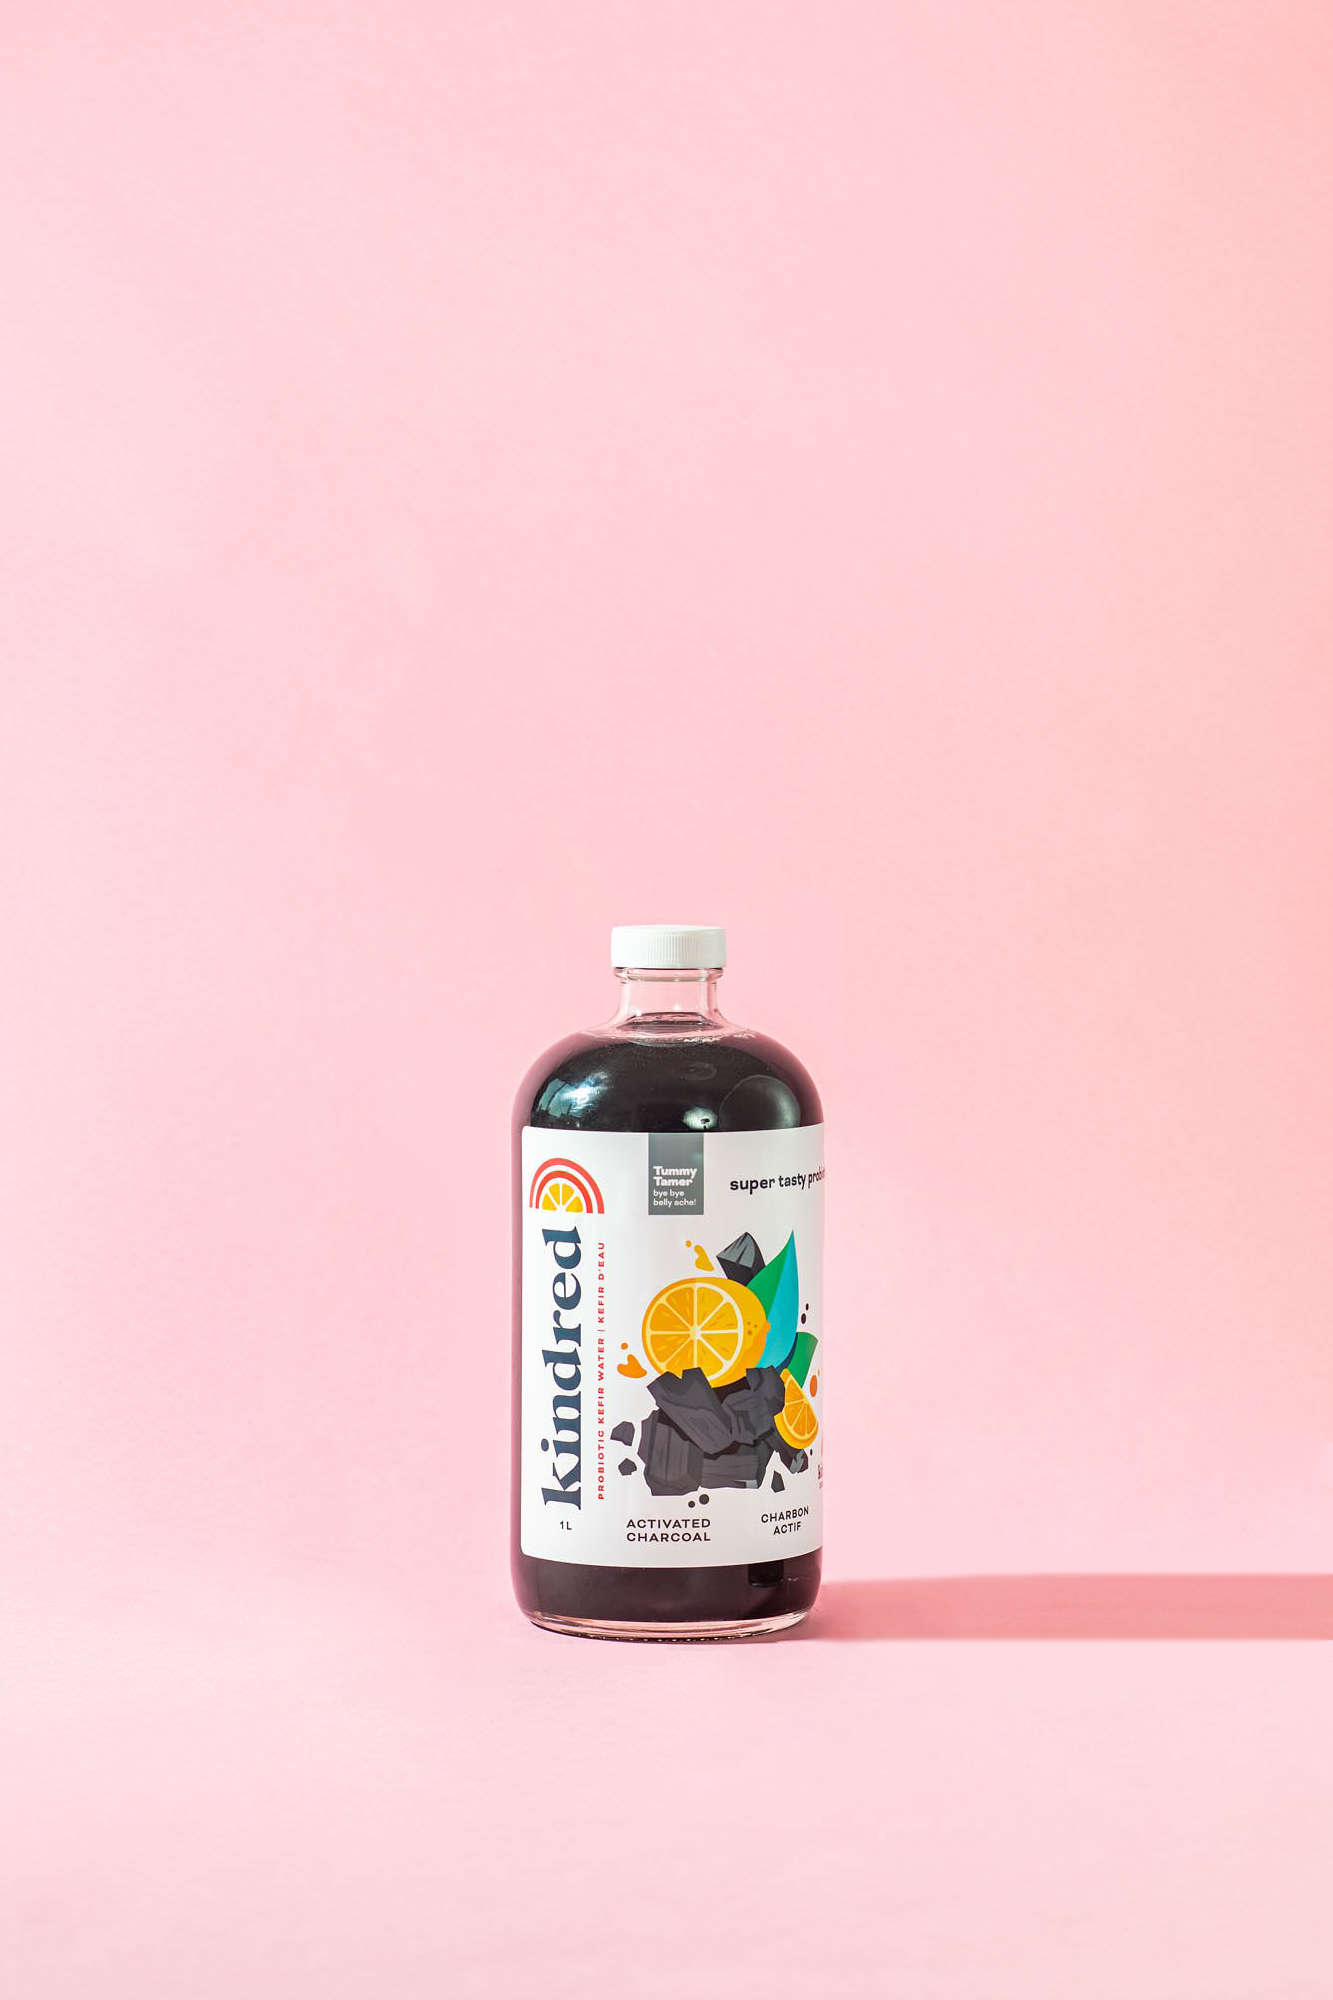 Kindred Cultures Activated Charcoal Kefir Water in a 1L Glass Bottle